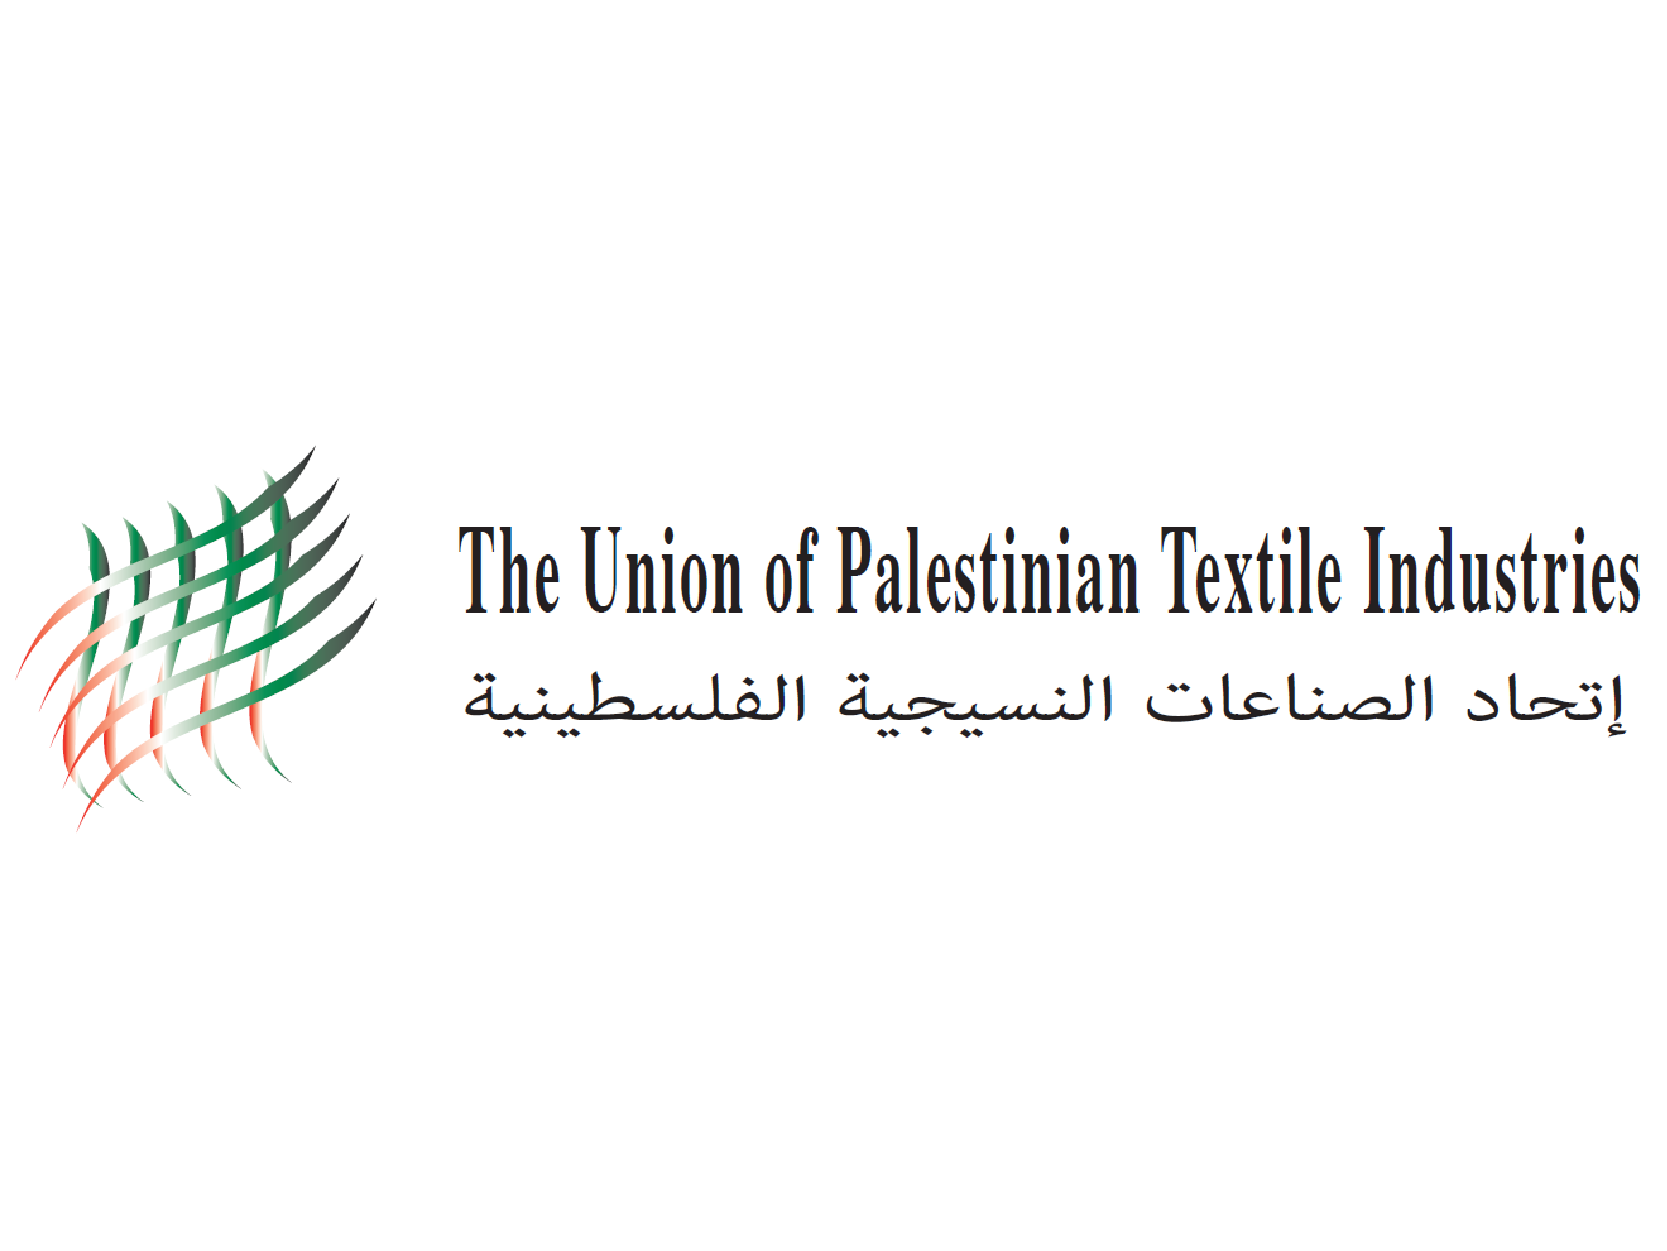 The Union of Palestinian Textile Industries